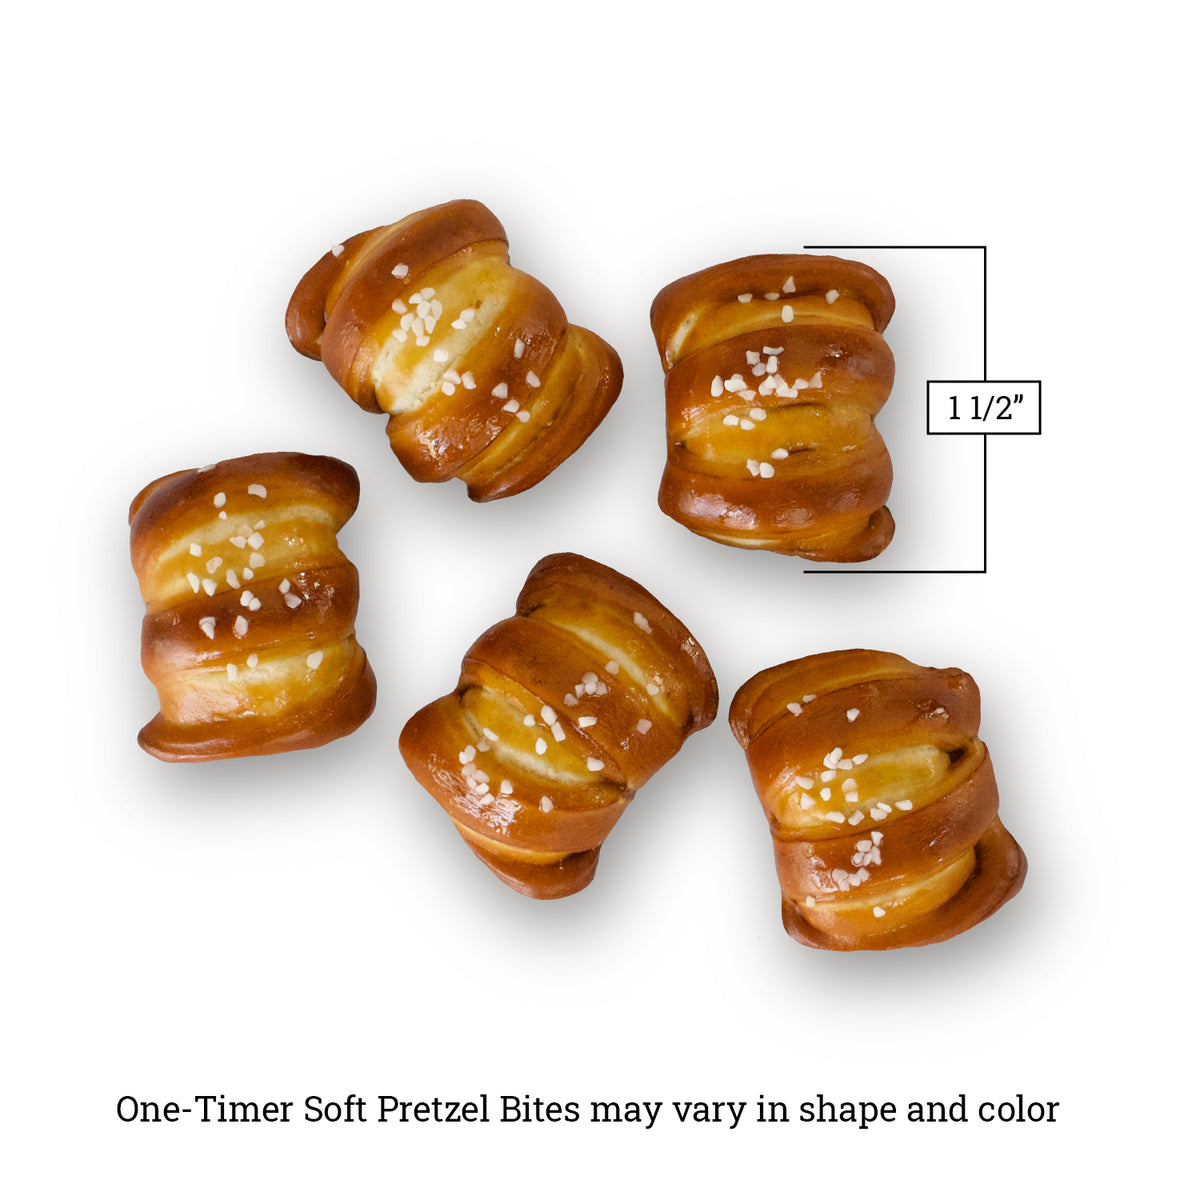 Best Sellers Case: 12 Bags of Sugar + Spice Pretzel Bites and 12 Bags of  Coffee + Cream Pretzel Bites (total of 24 7 oz. bags)